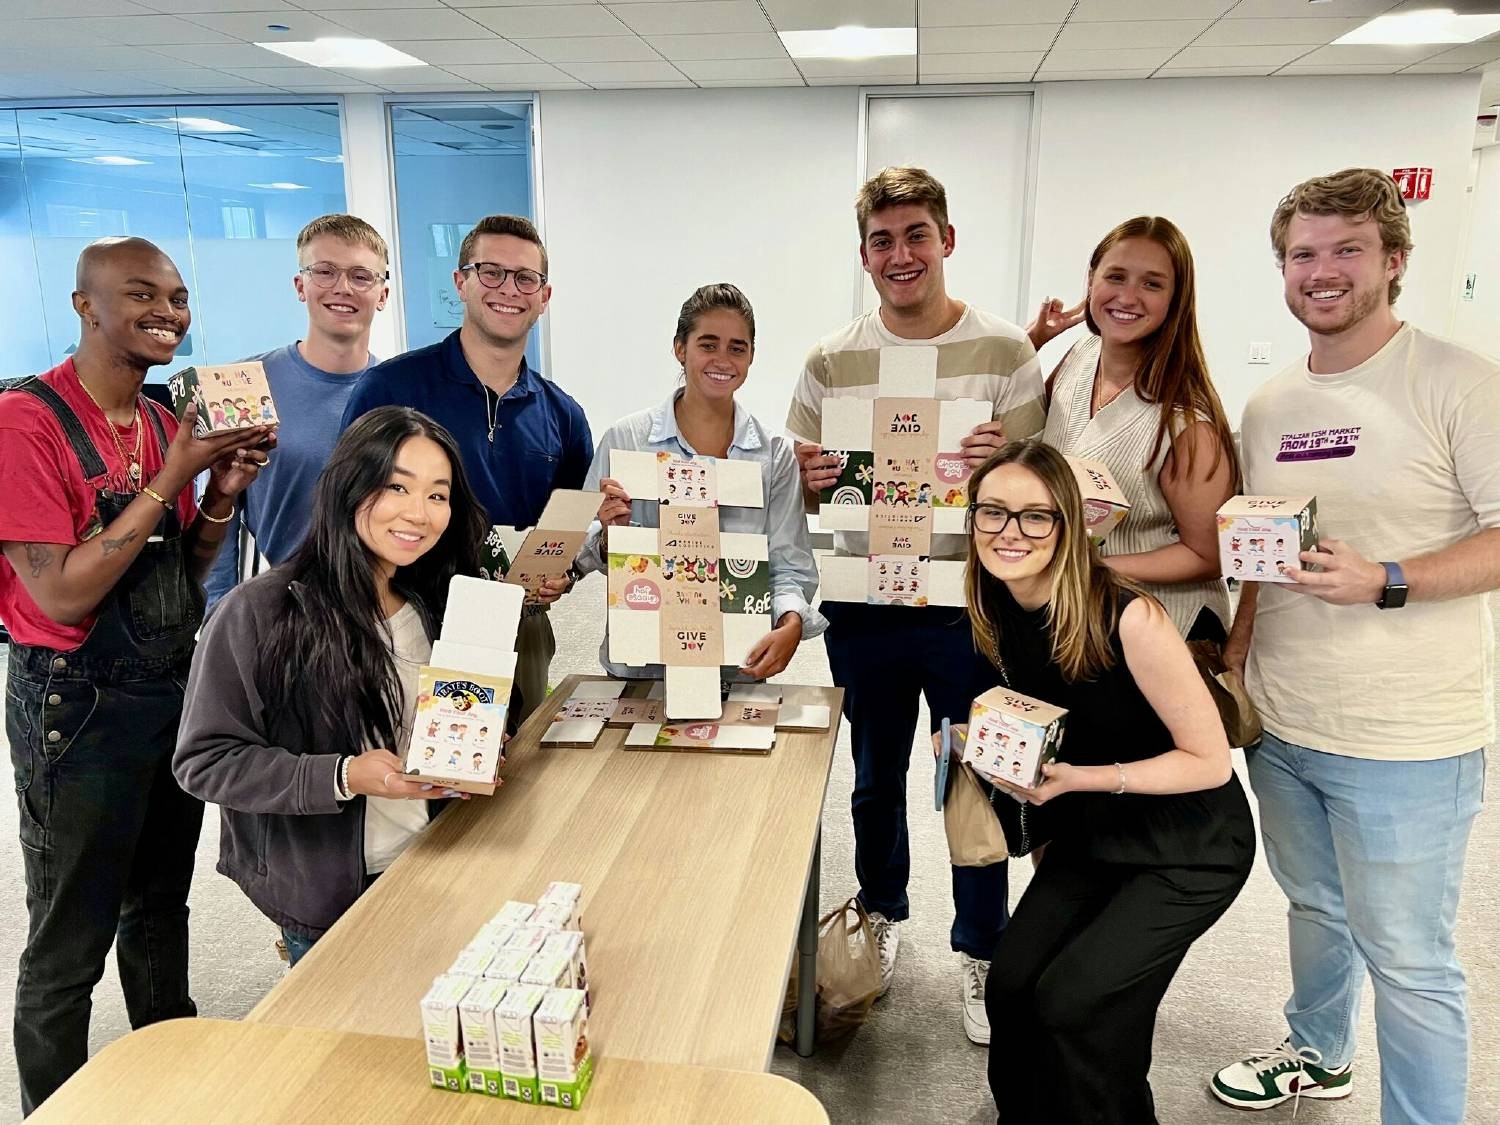 The Arrive Logistics team partners with The GiveJoy Foundation to deliver nearly 700 nutrient-packed lunches to students